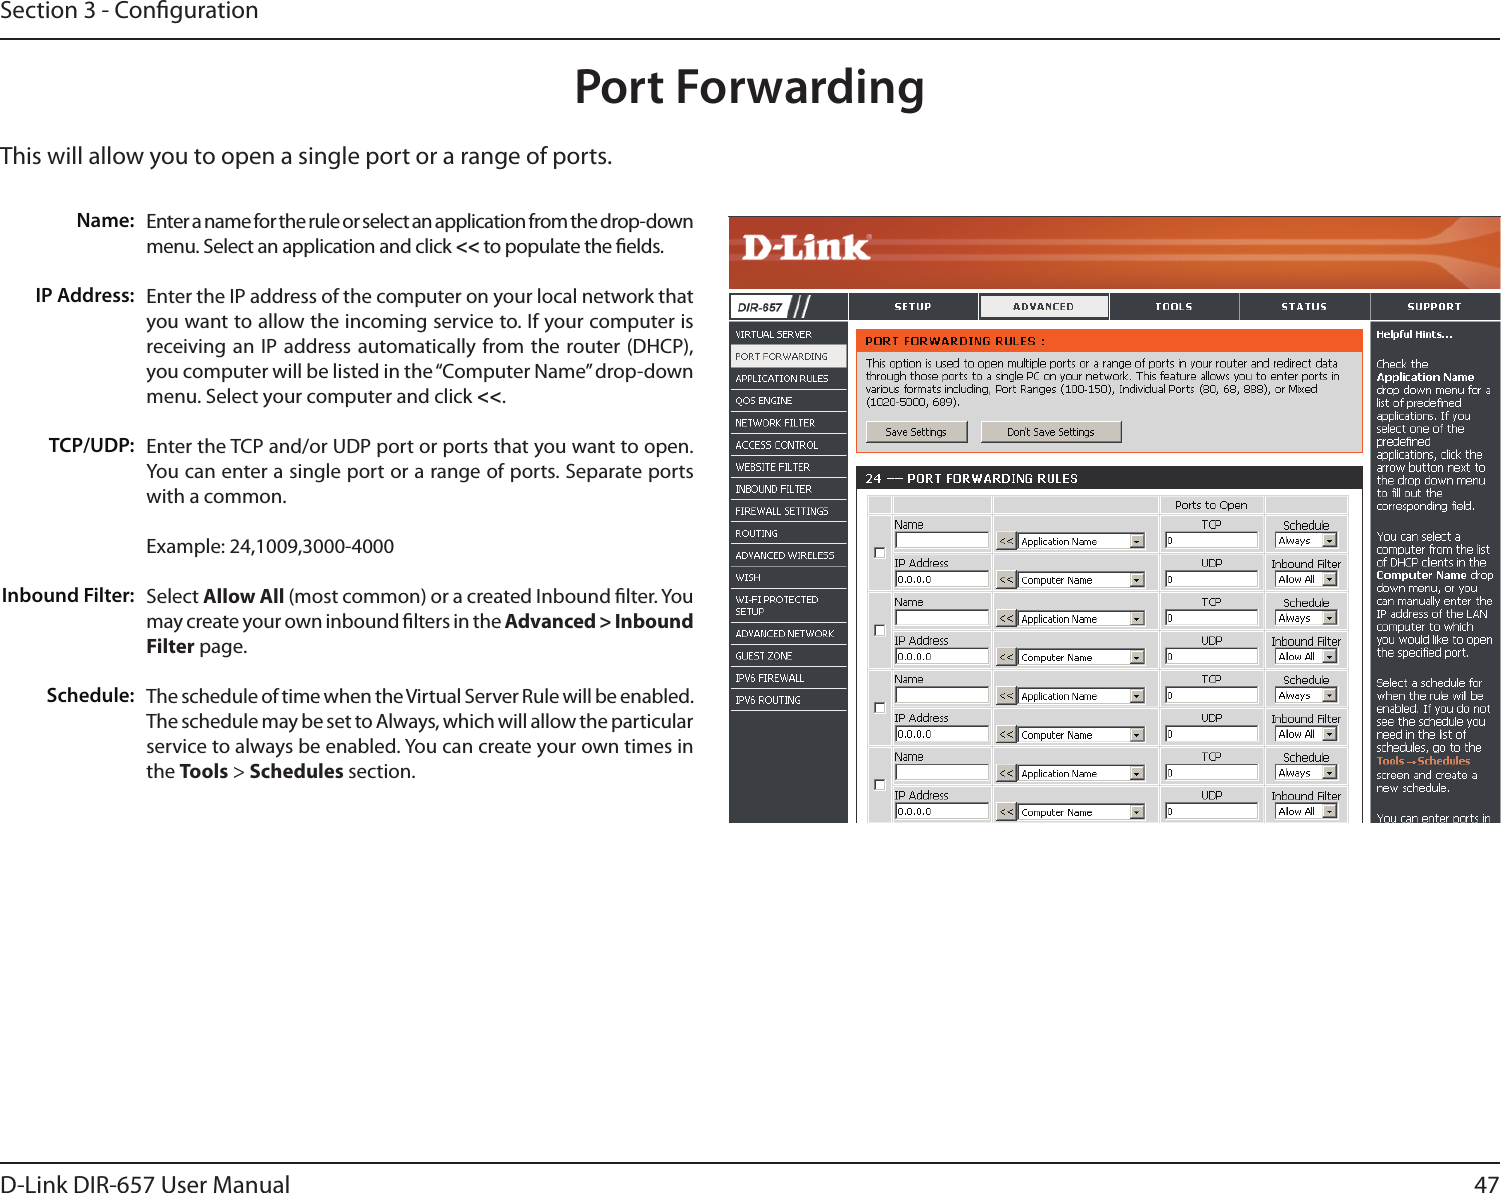 47D-Link DIR-657 User ManualSection 3 - CongurationThis will allow you to open a single port or a range of ports.Port ForwardingEnter a name for the rule or select an application from the drop-down menu. Select an application and click &lt;&lt; to populate the elds.Enter the IP address of the computer on your local network that you want to allow the incoming service to. If your computer is receiving an IP address automatically from the router (DHCP), you computer will be listed in the “Computer Name” drop-down menu. Select your computer and click &lt;&lt;. Enter the TCP and/or UDP port or ports that you want to open. You can enter a single port or a range of ports. Separate ports with a common.Example: 24,1009,3000-4000Select Allow All (most common) or a created Inbound lter. You may create your own inbound lters in the Advanced &gt; Inbound Filter page.The schedule of time when the Virtual Server Rule will be enabled. The schedule may be set to Always, which will allow the particular service to always be enabled. You can create your own times in the Tools &gt; Schedules section.Name:IP Address:TCP/UDP:Inbound Filter:Schedule: